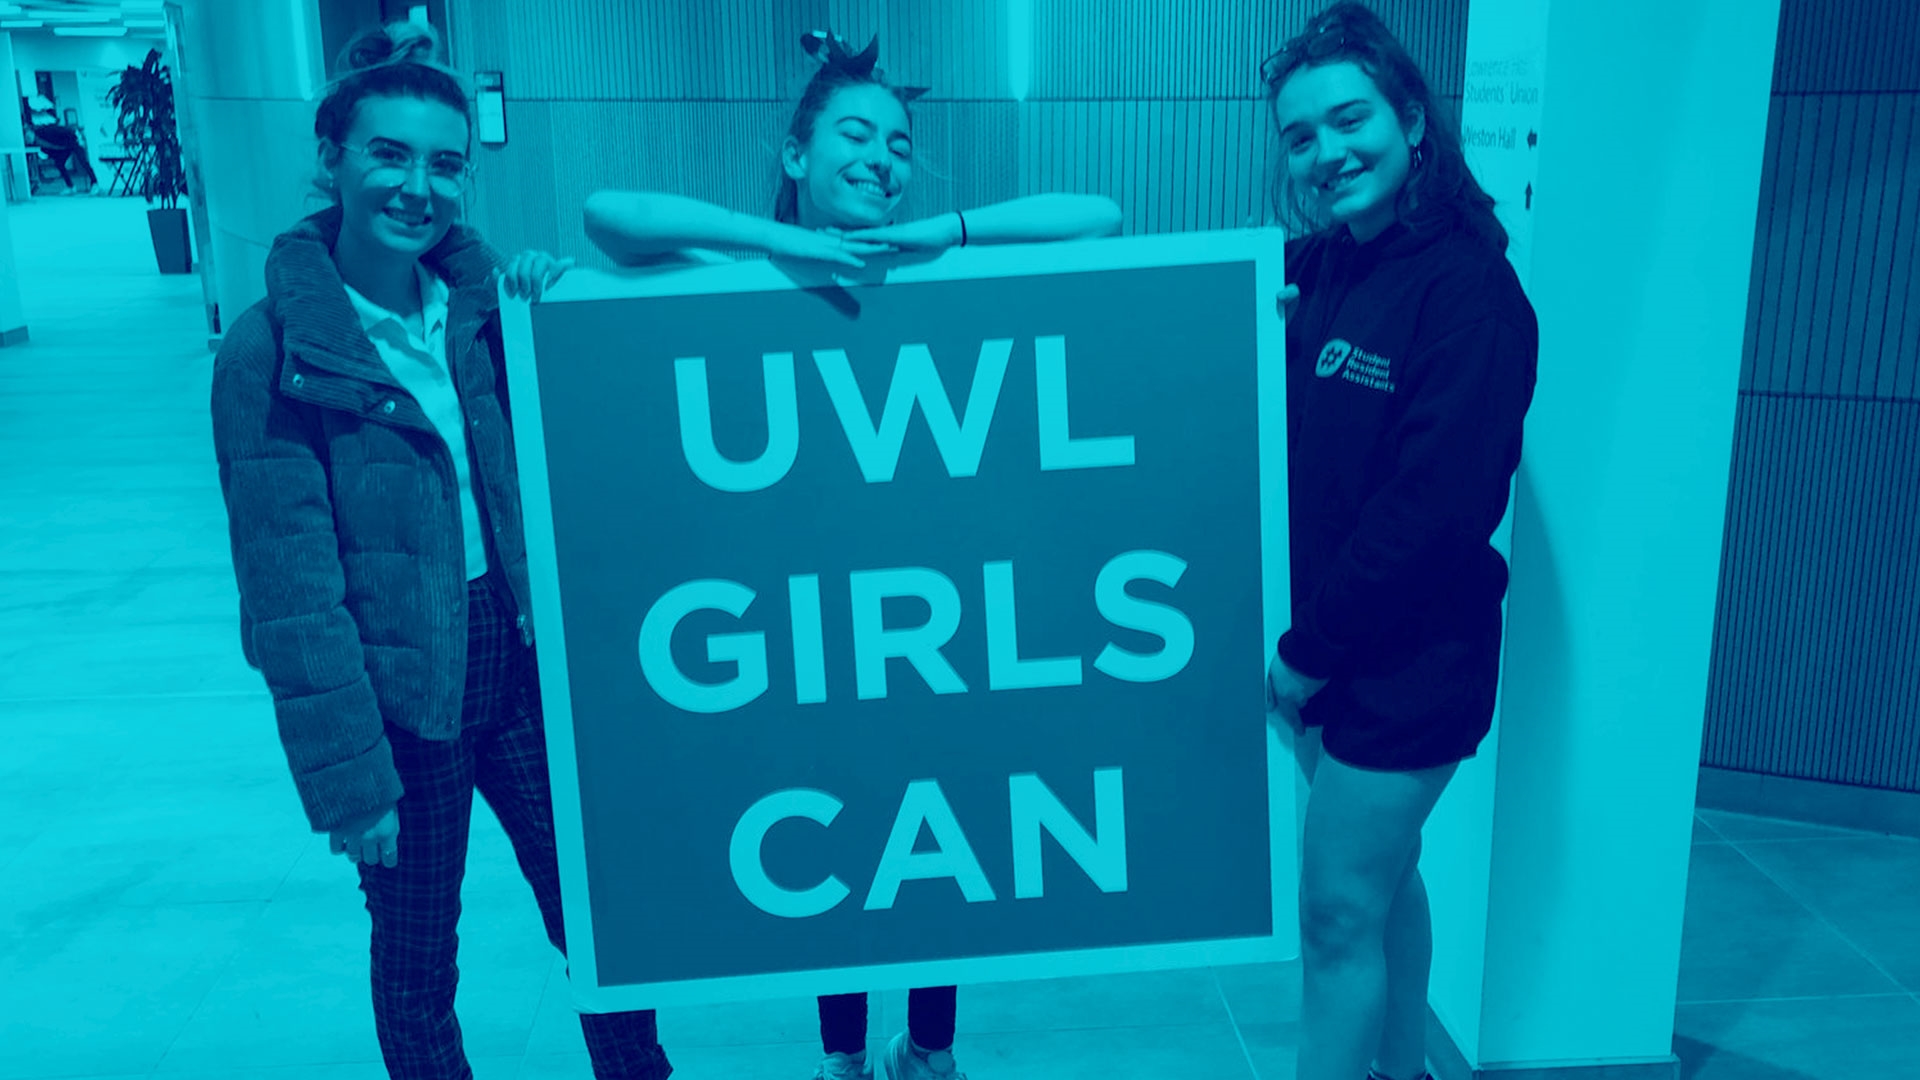 Student Group holding UWL Girls Can sign